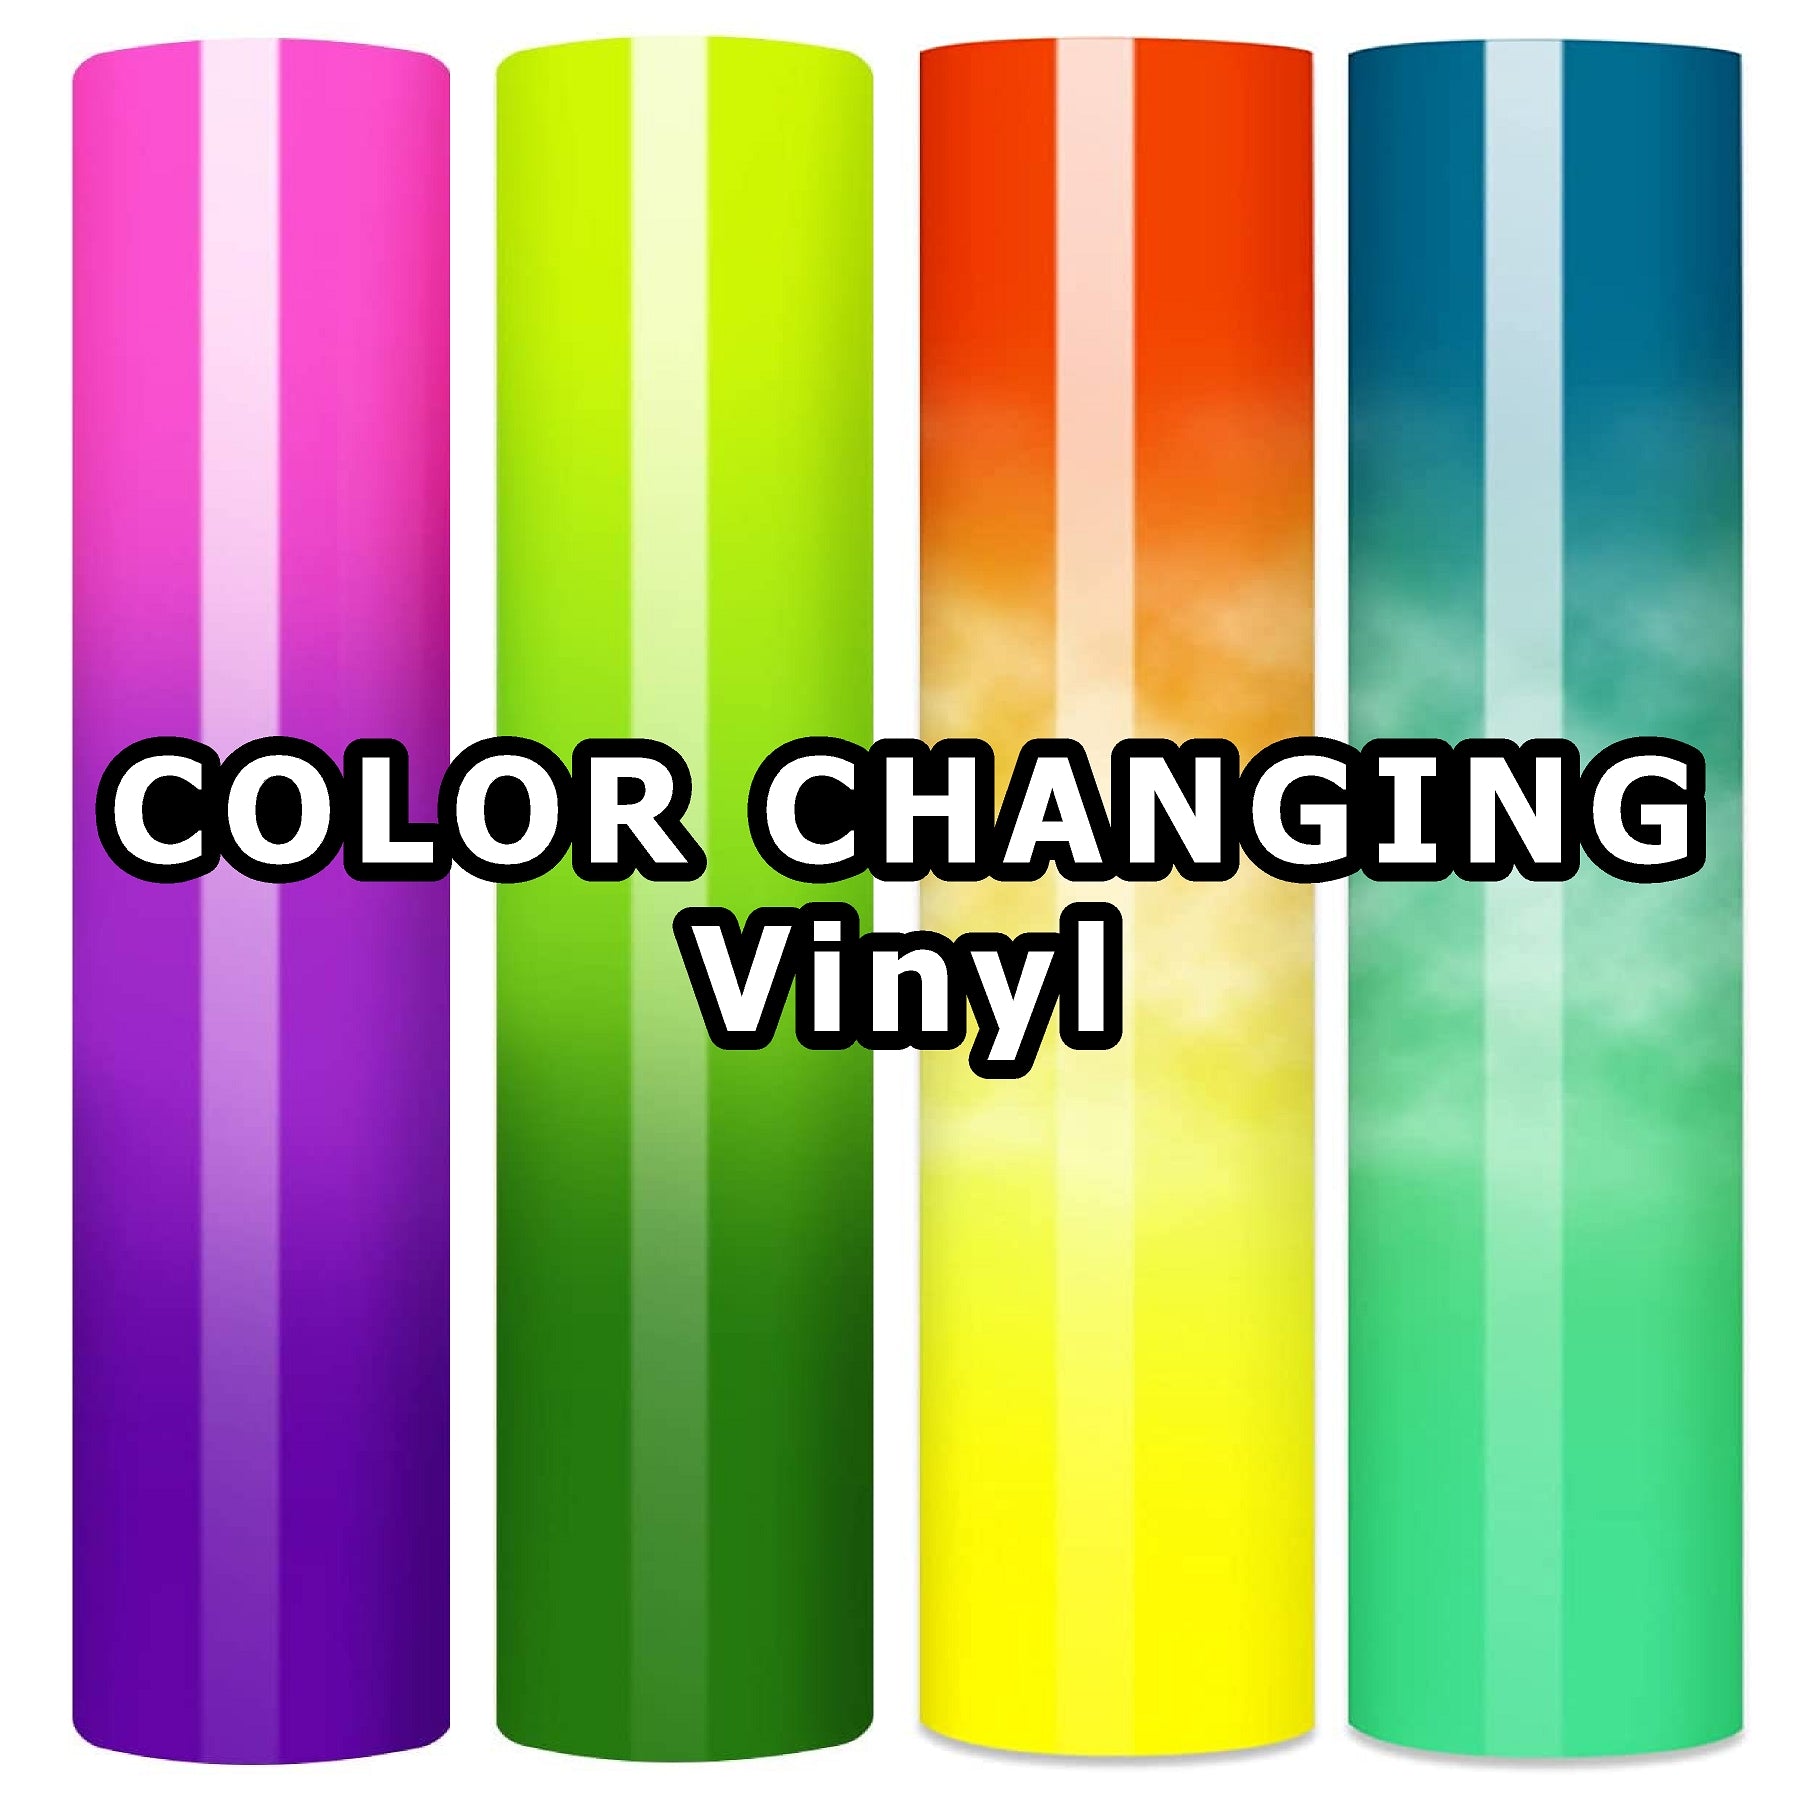 1 Sheet Color Changing Vinyl Stickers, 12 x 7.8 inch Gradient Permanent Vinyl Bundle, Craft Adhesive Vinyl, Sensitive to Cold Self Adhesive Vinyl for